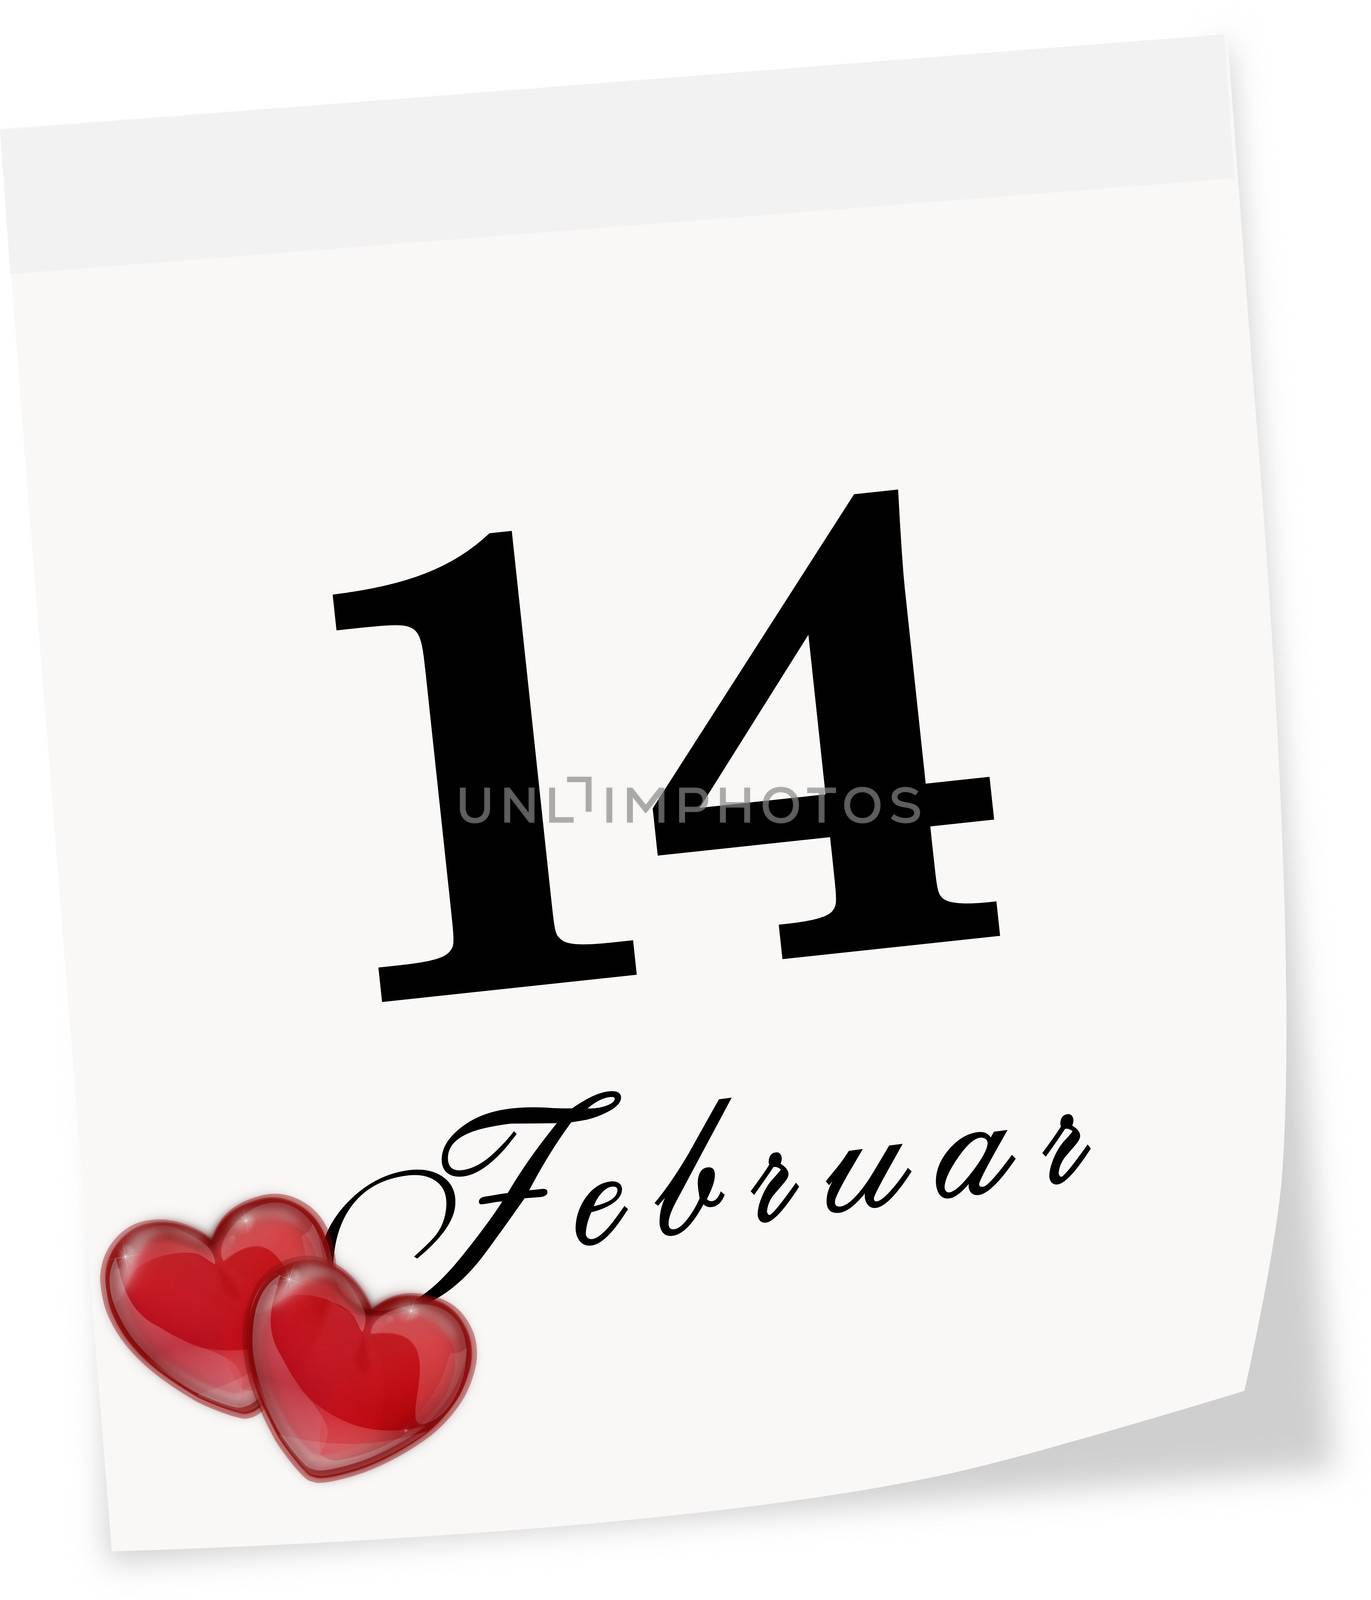  International Valentine's Day on February 14th. Page of calendar